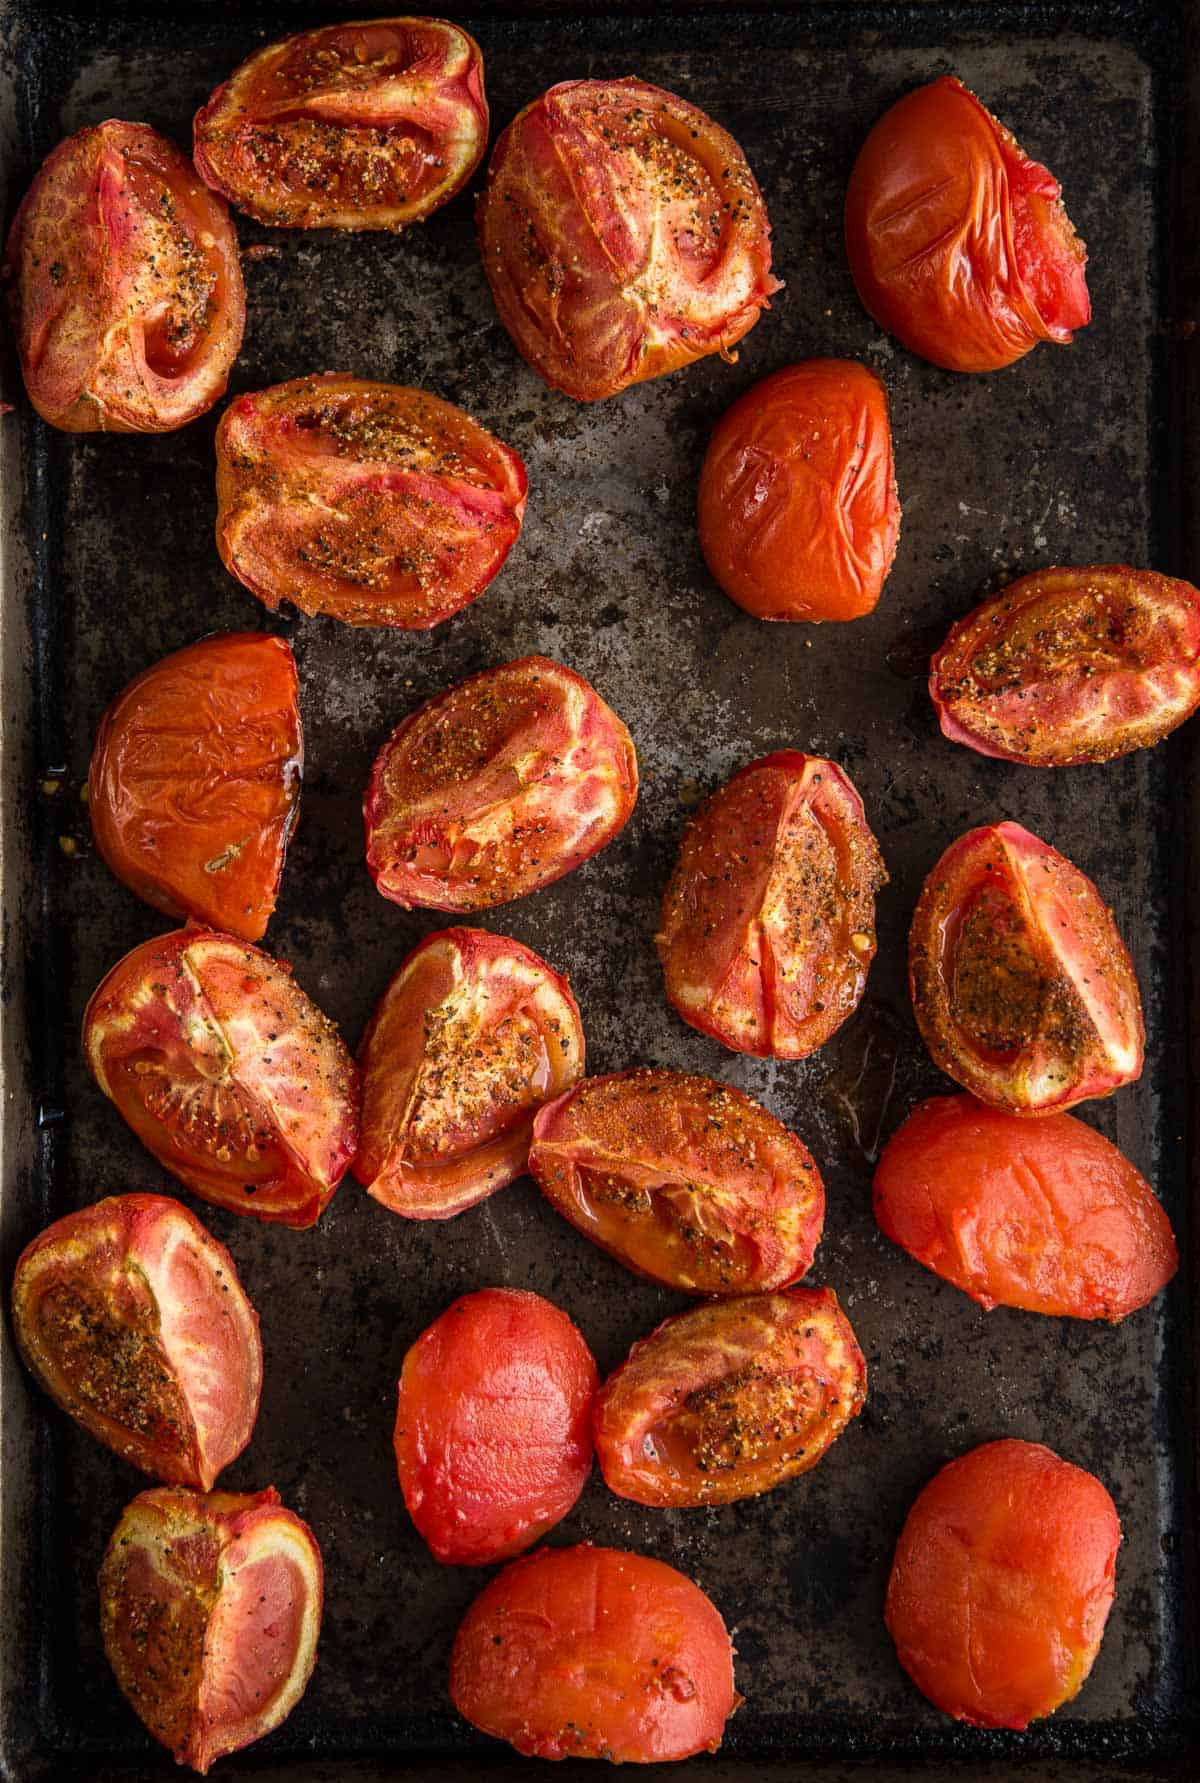 A pan full of smoked tomatoes